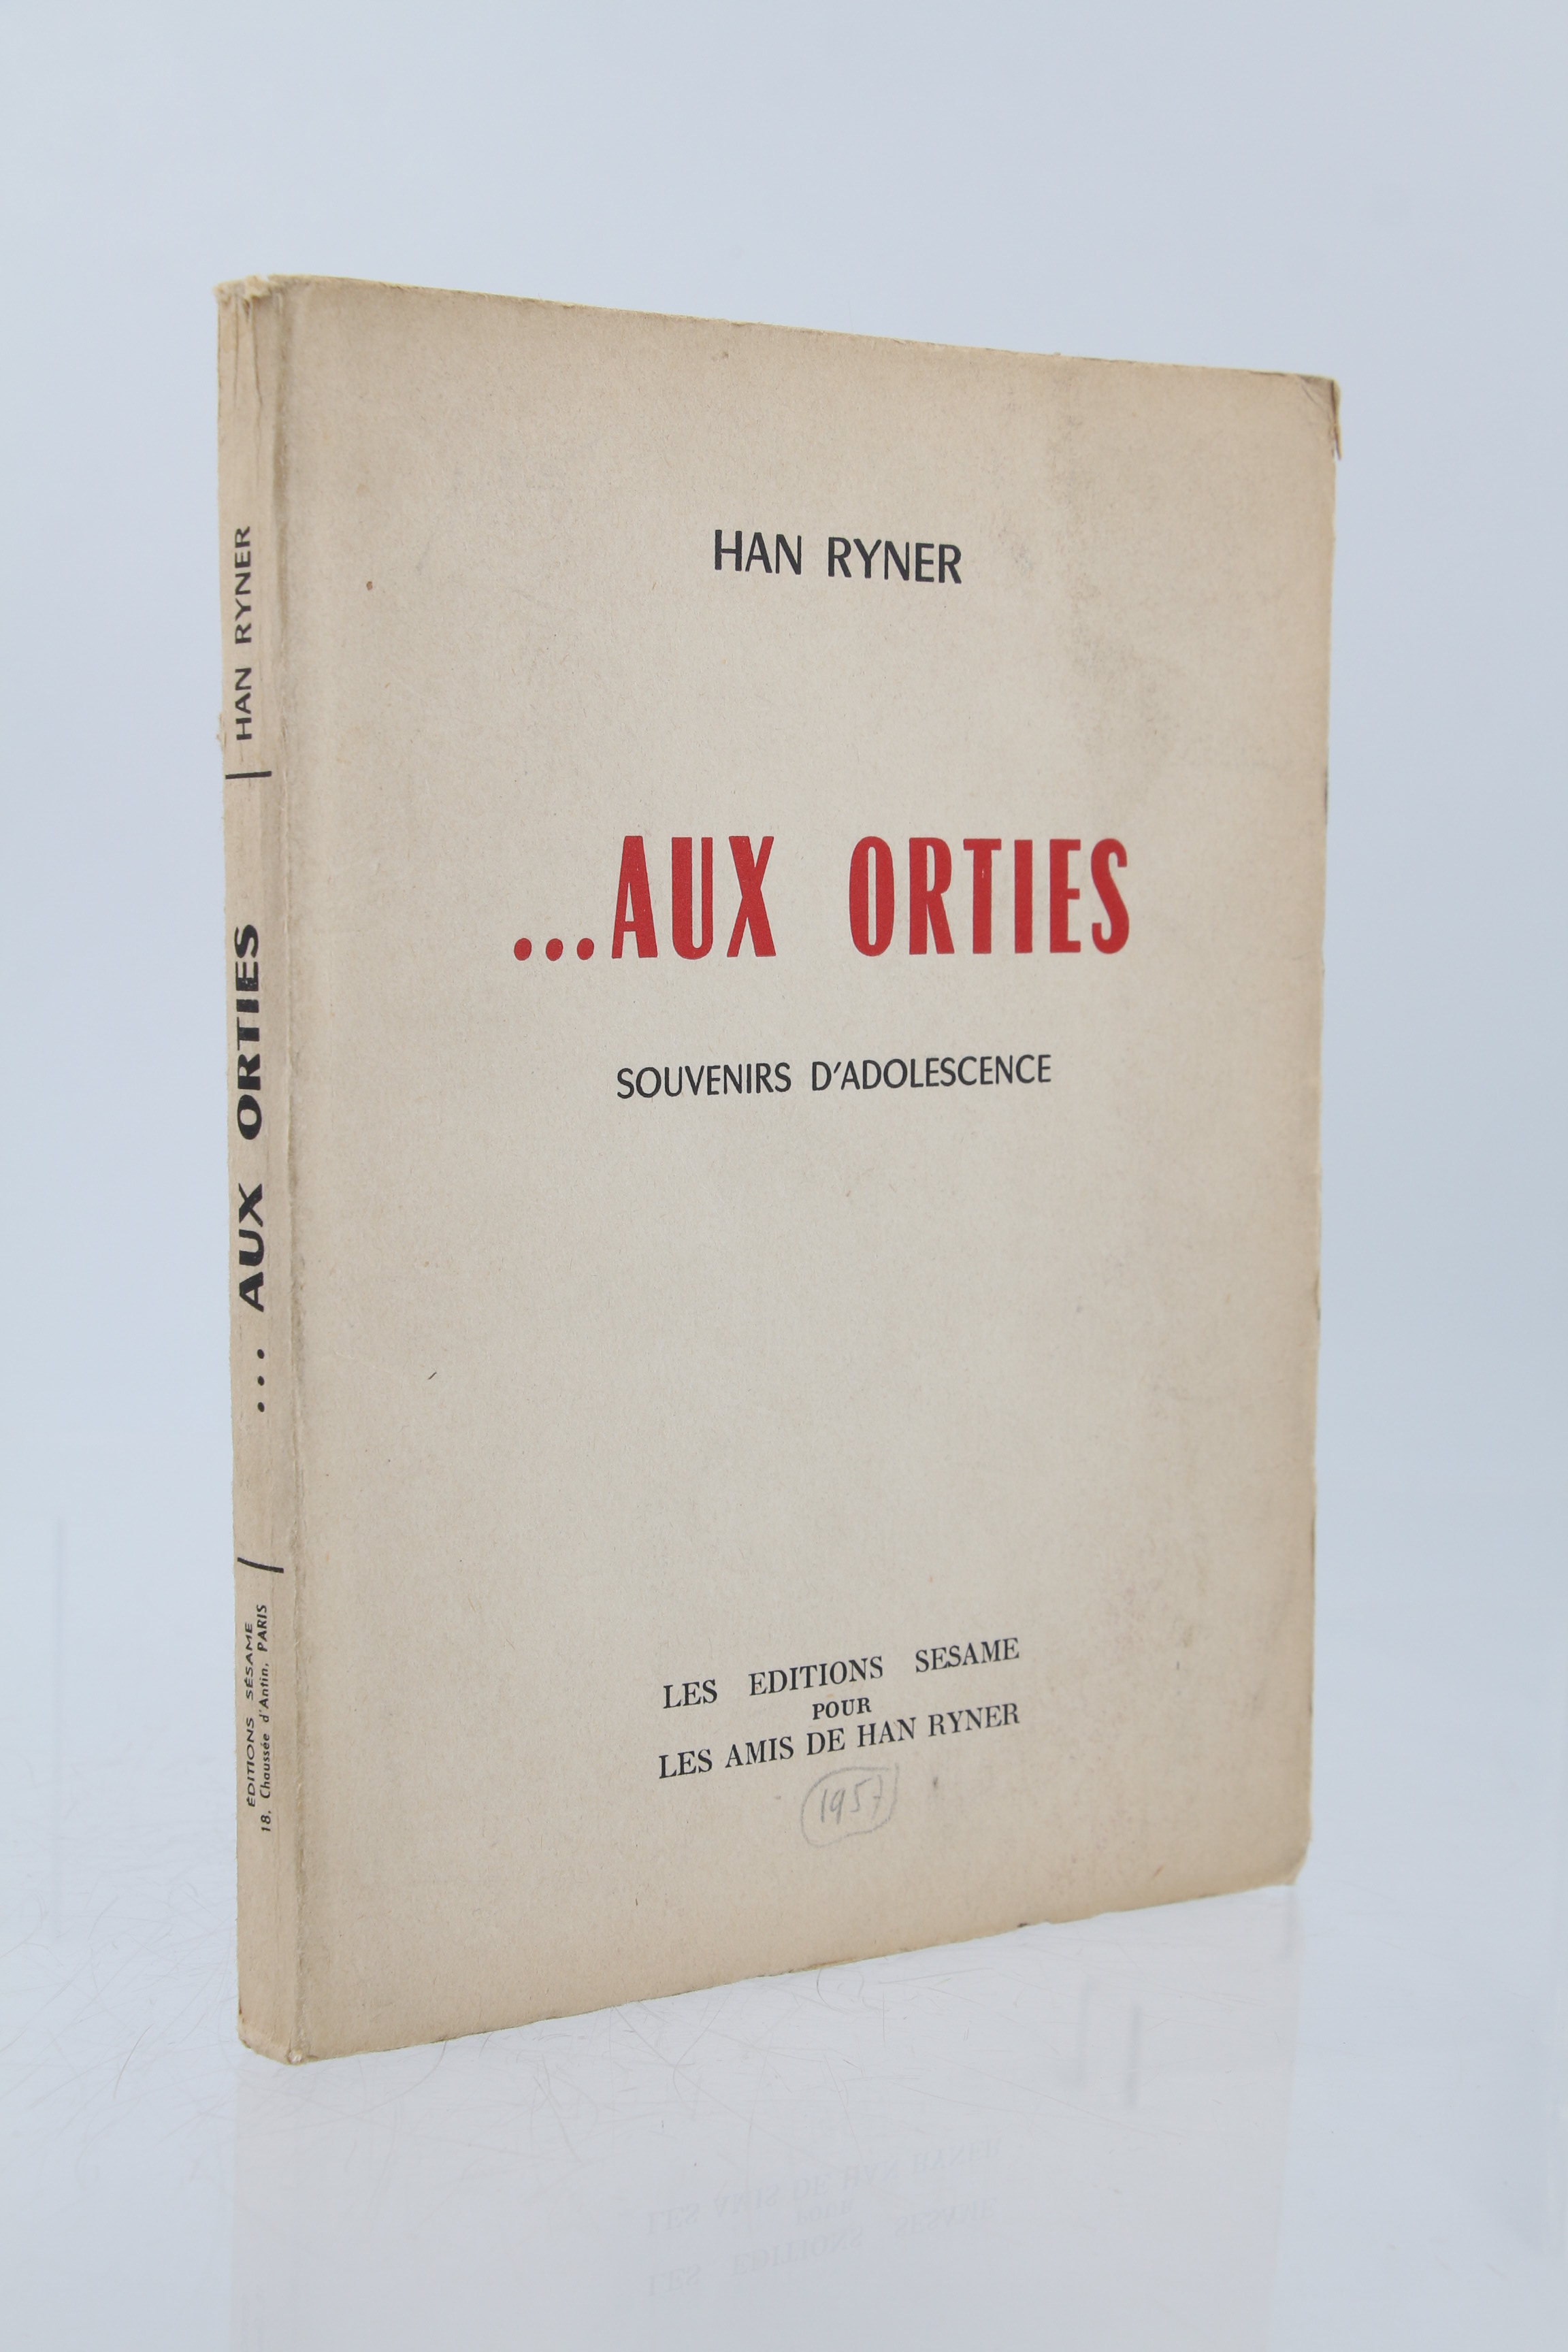 Image of .Aux orties souvenirs d'adolescence RYNER Han [ ] [Softcover]